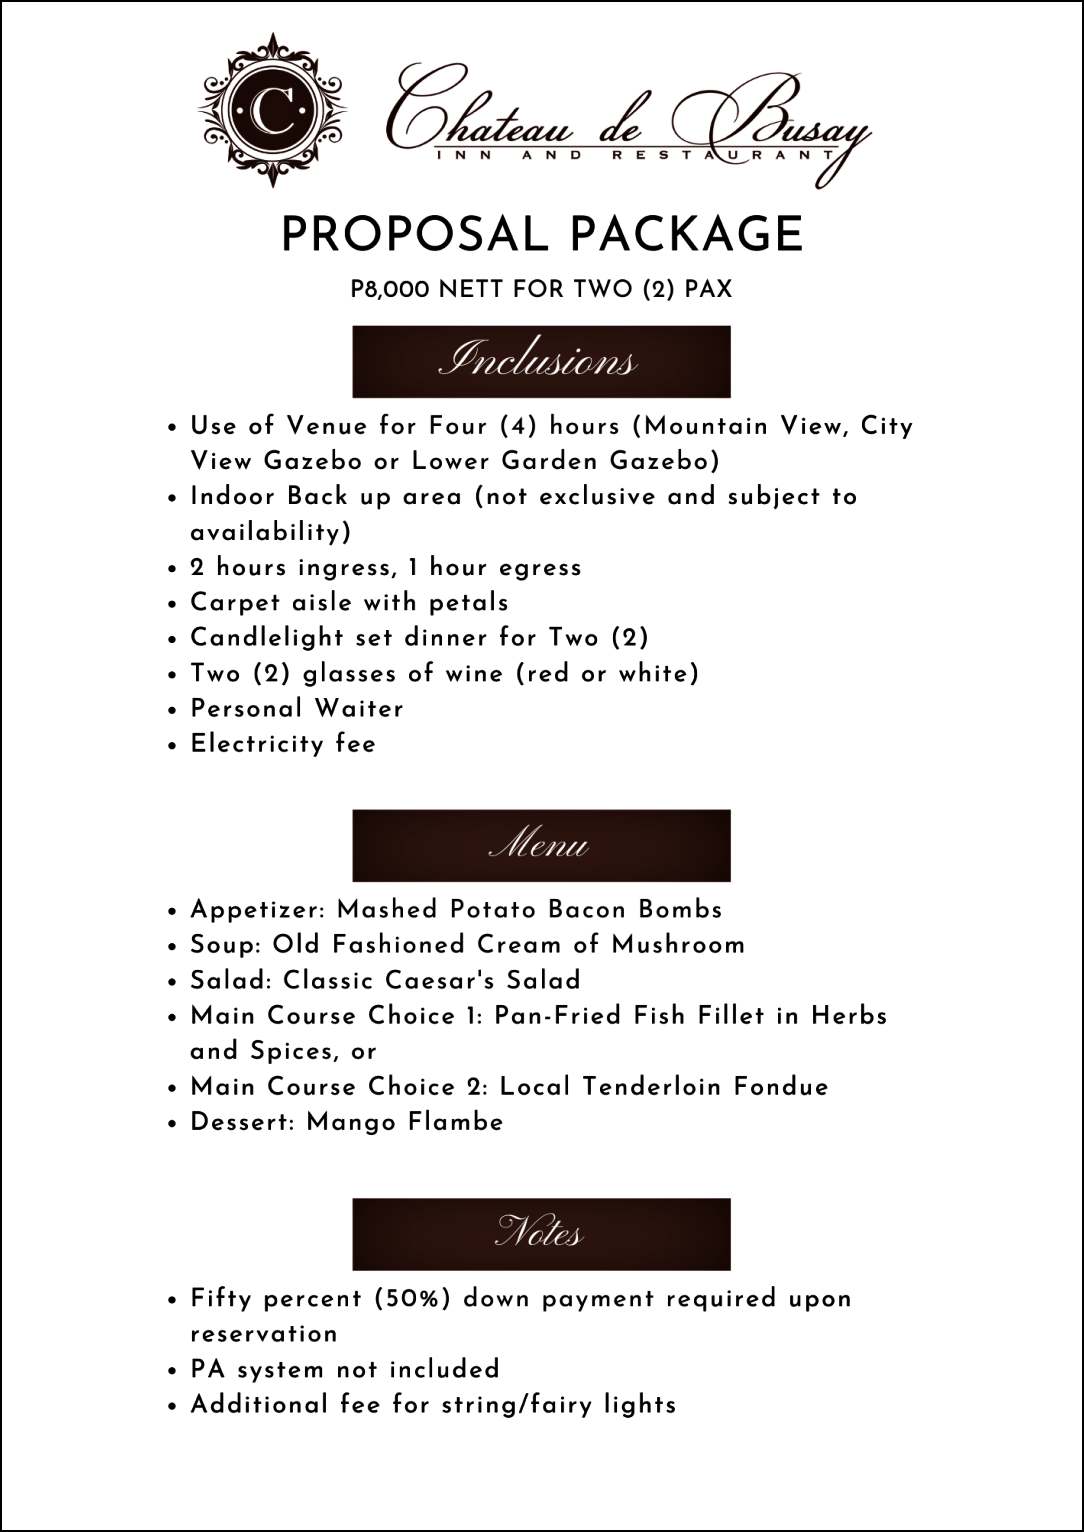 PROPOSAL PACKAGE